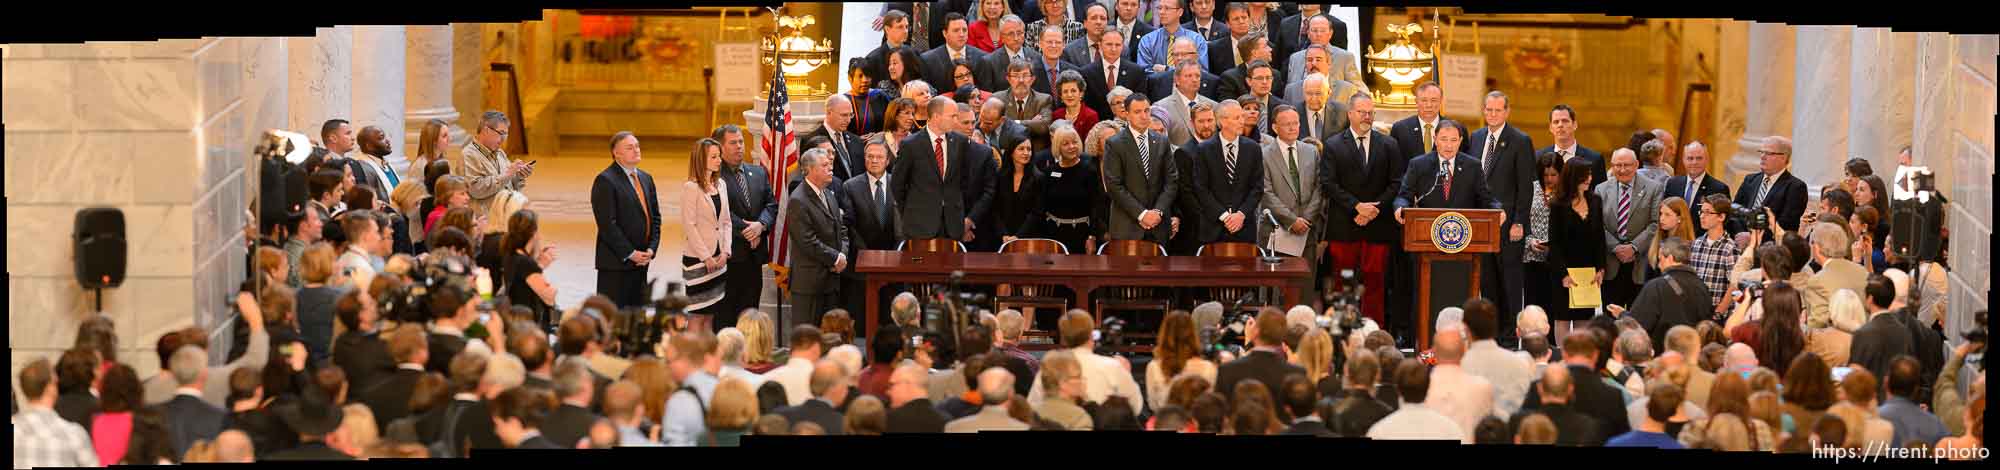 Gov. Gary Herbert signs into law SB296, which gives statewide non-discrimination protections to the gay and transgender community, while providing safeguards for religious liberty, in the rotunda of the State Capitol Building in Salt Lake City, Thursday March 12, 2015.